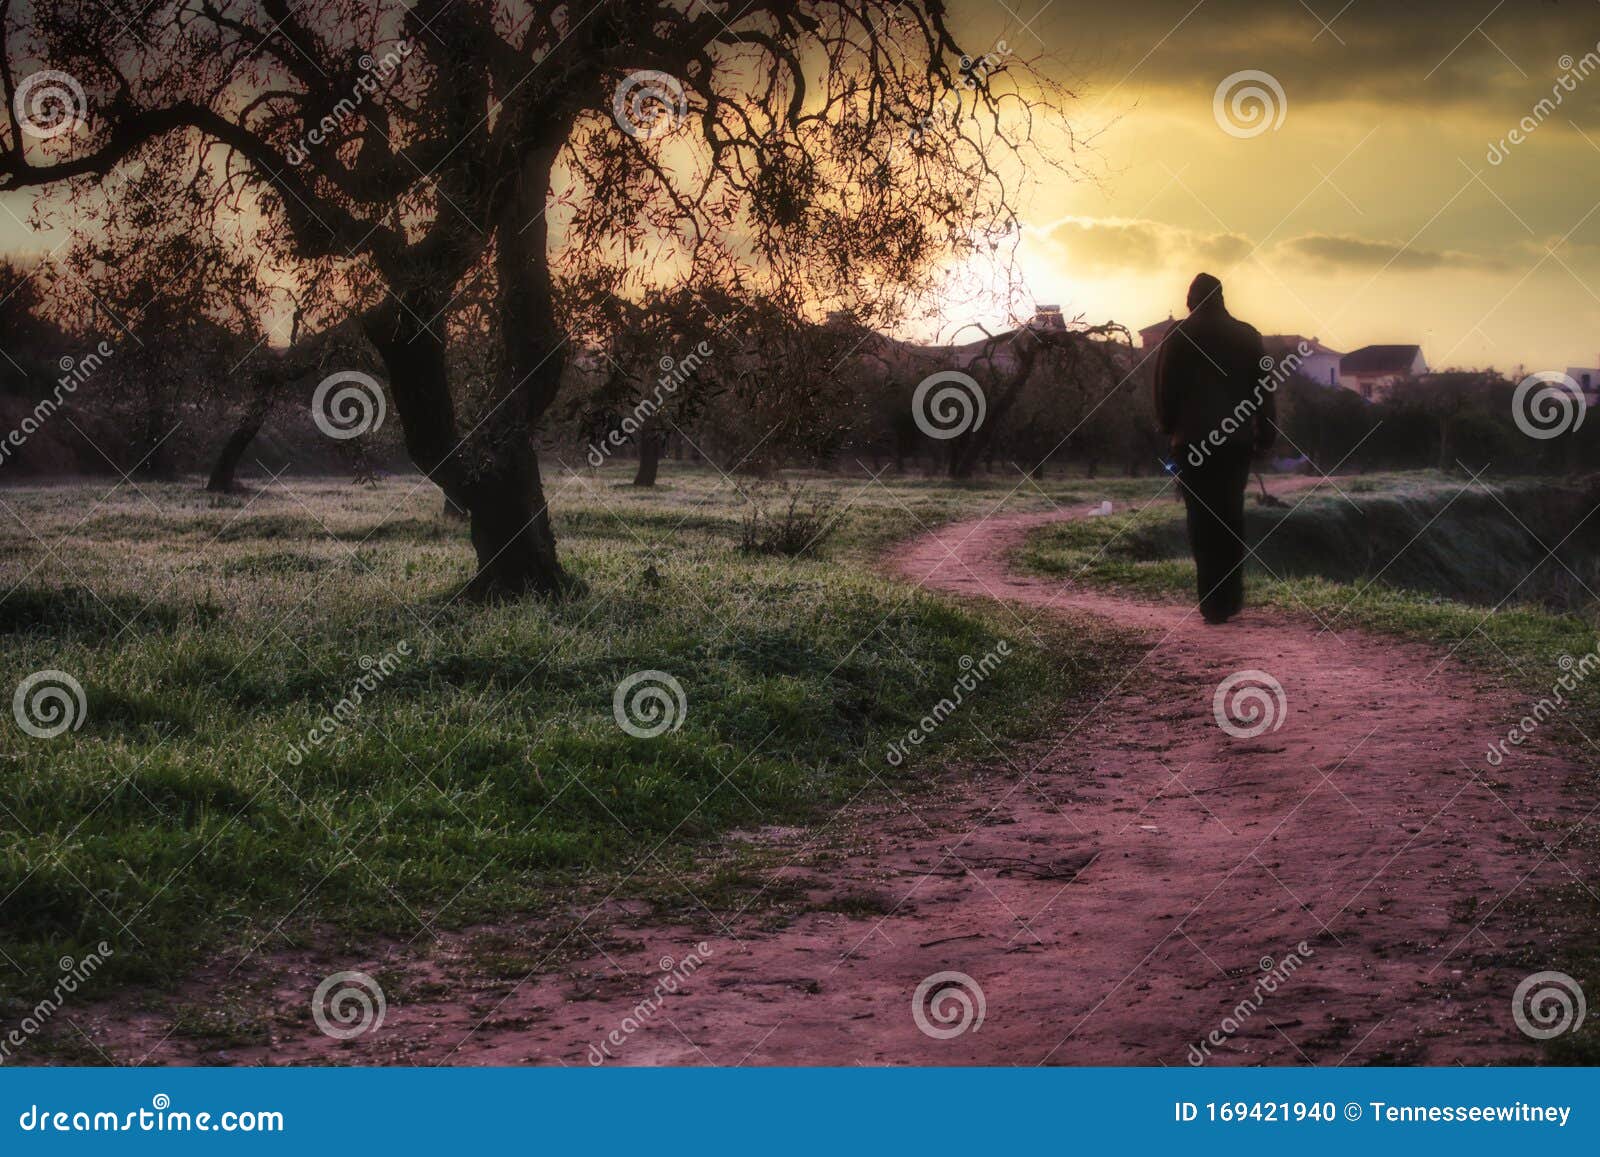 a man walking on an idylic country path with the sun in the distance